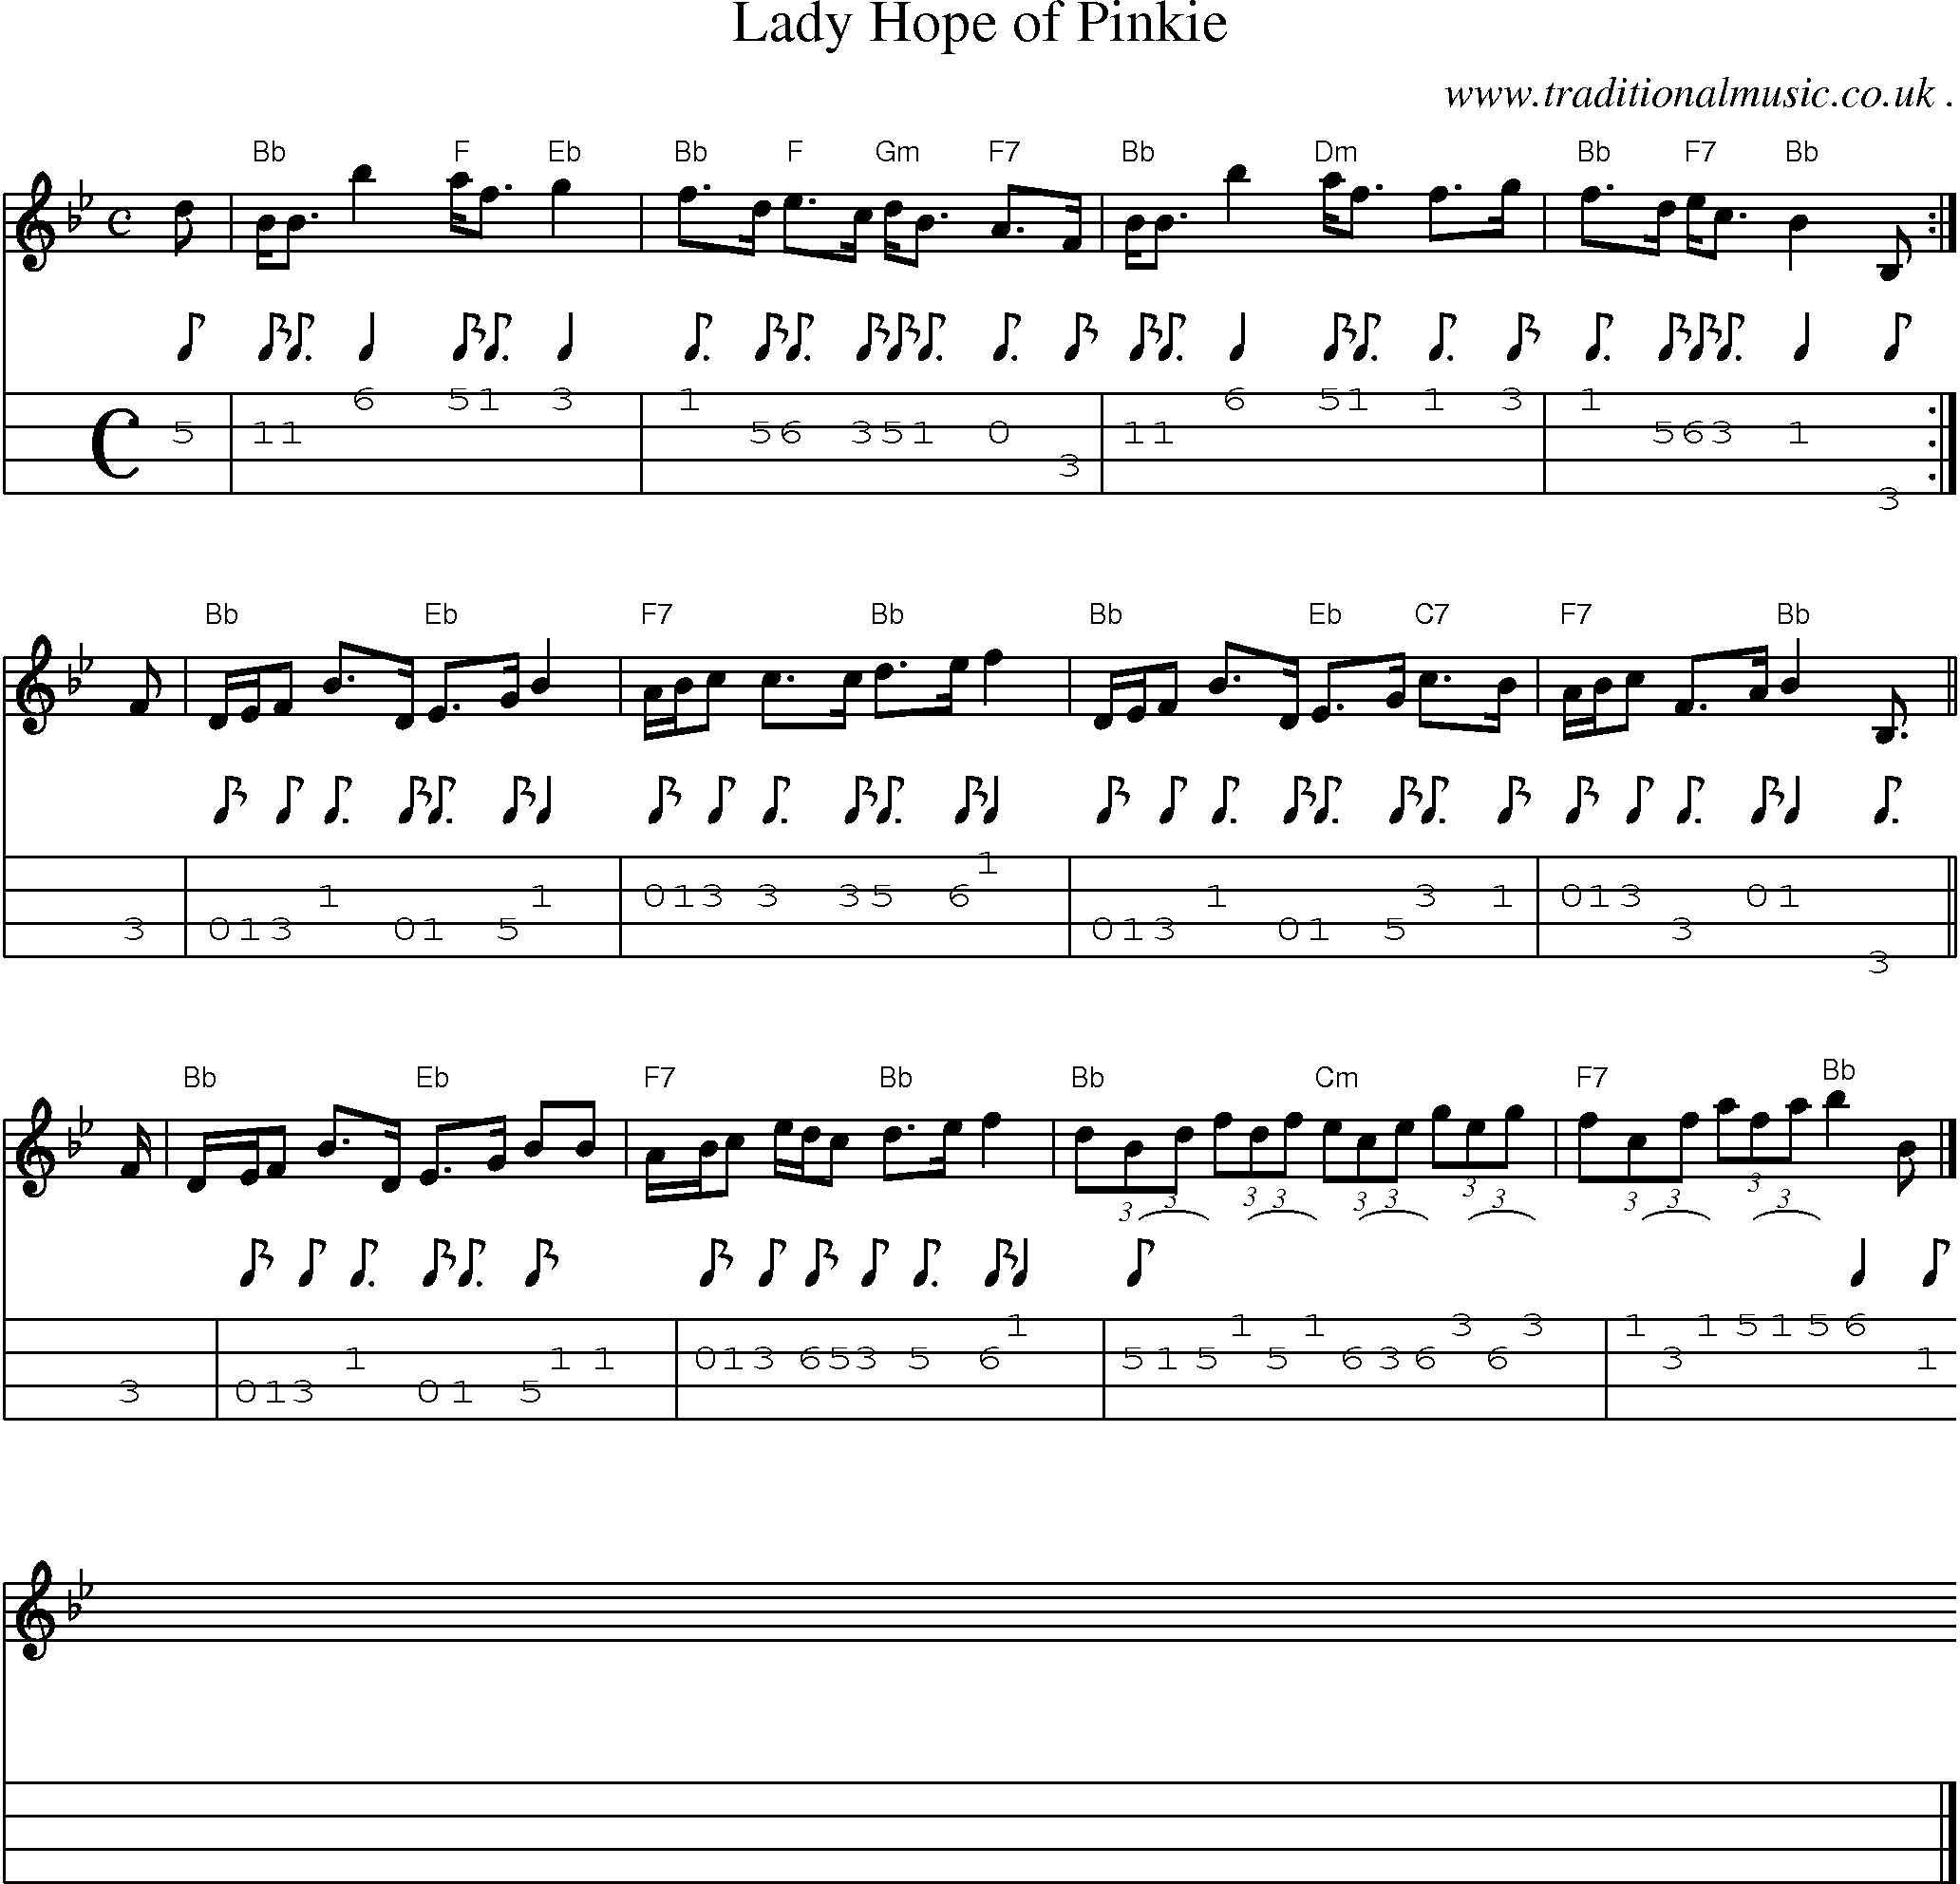 Sheet-music  score, Chords and Mandolin Tabs for Lady Hope Of Pinkie